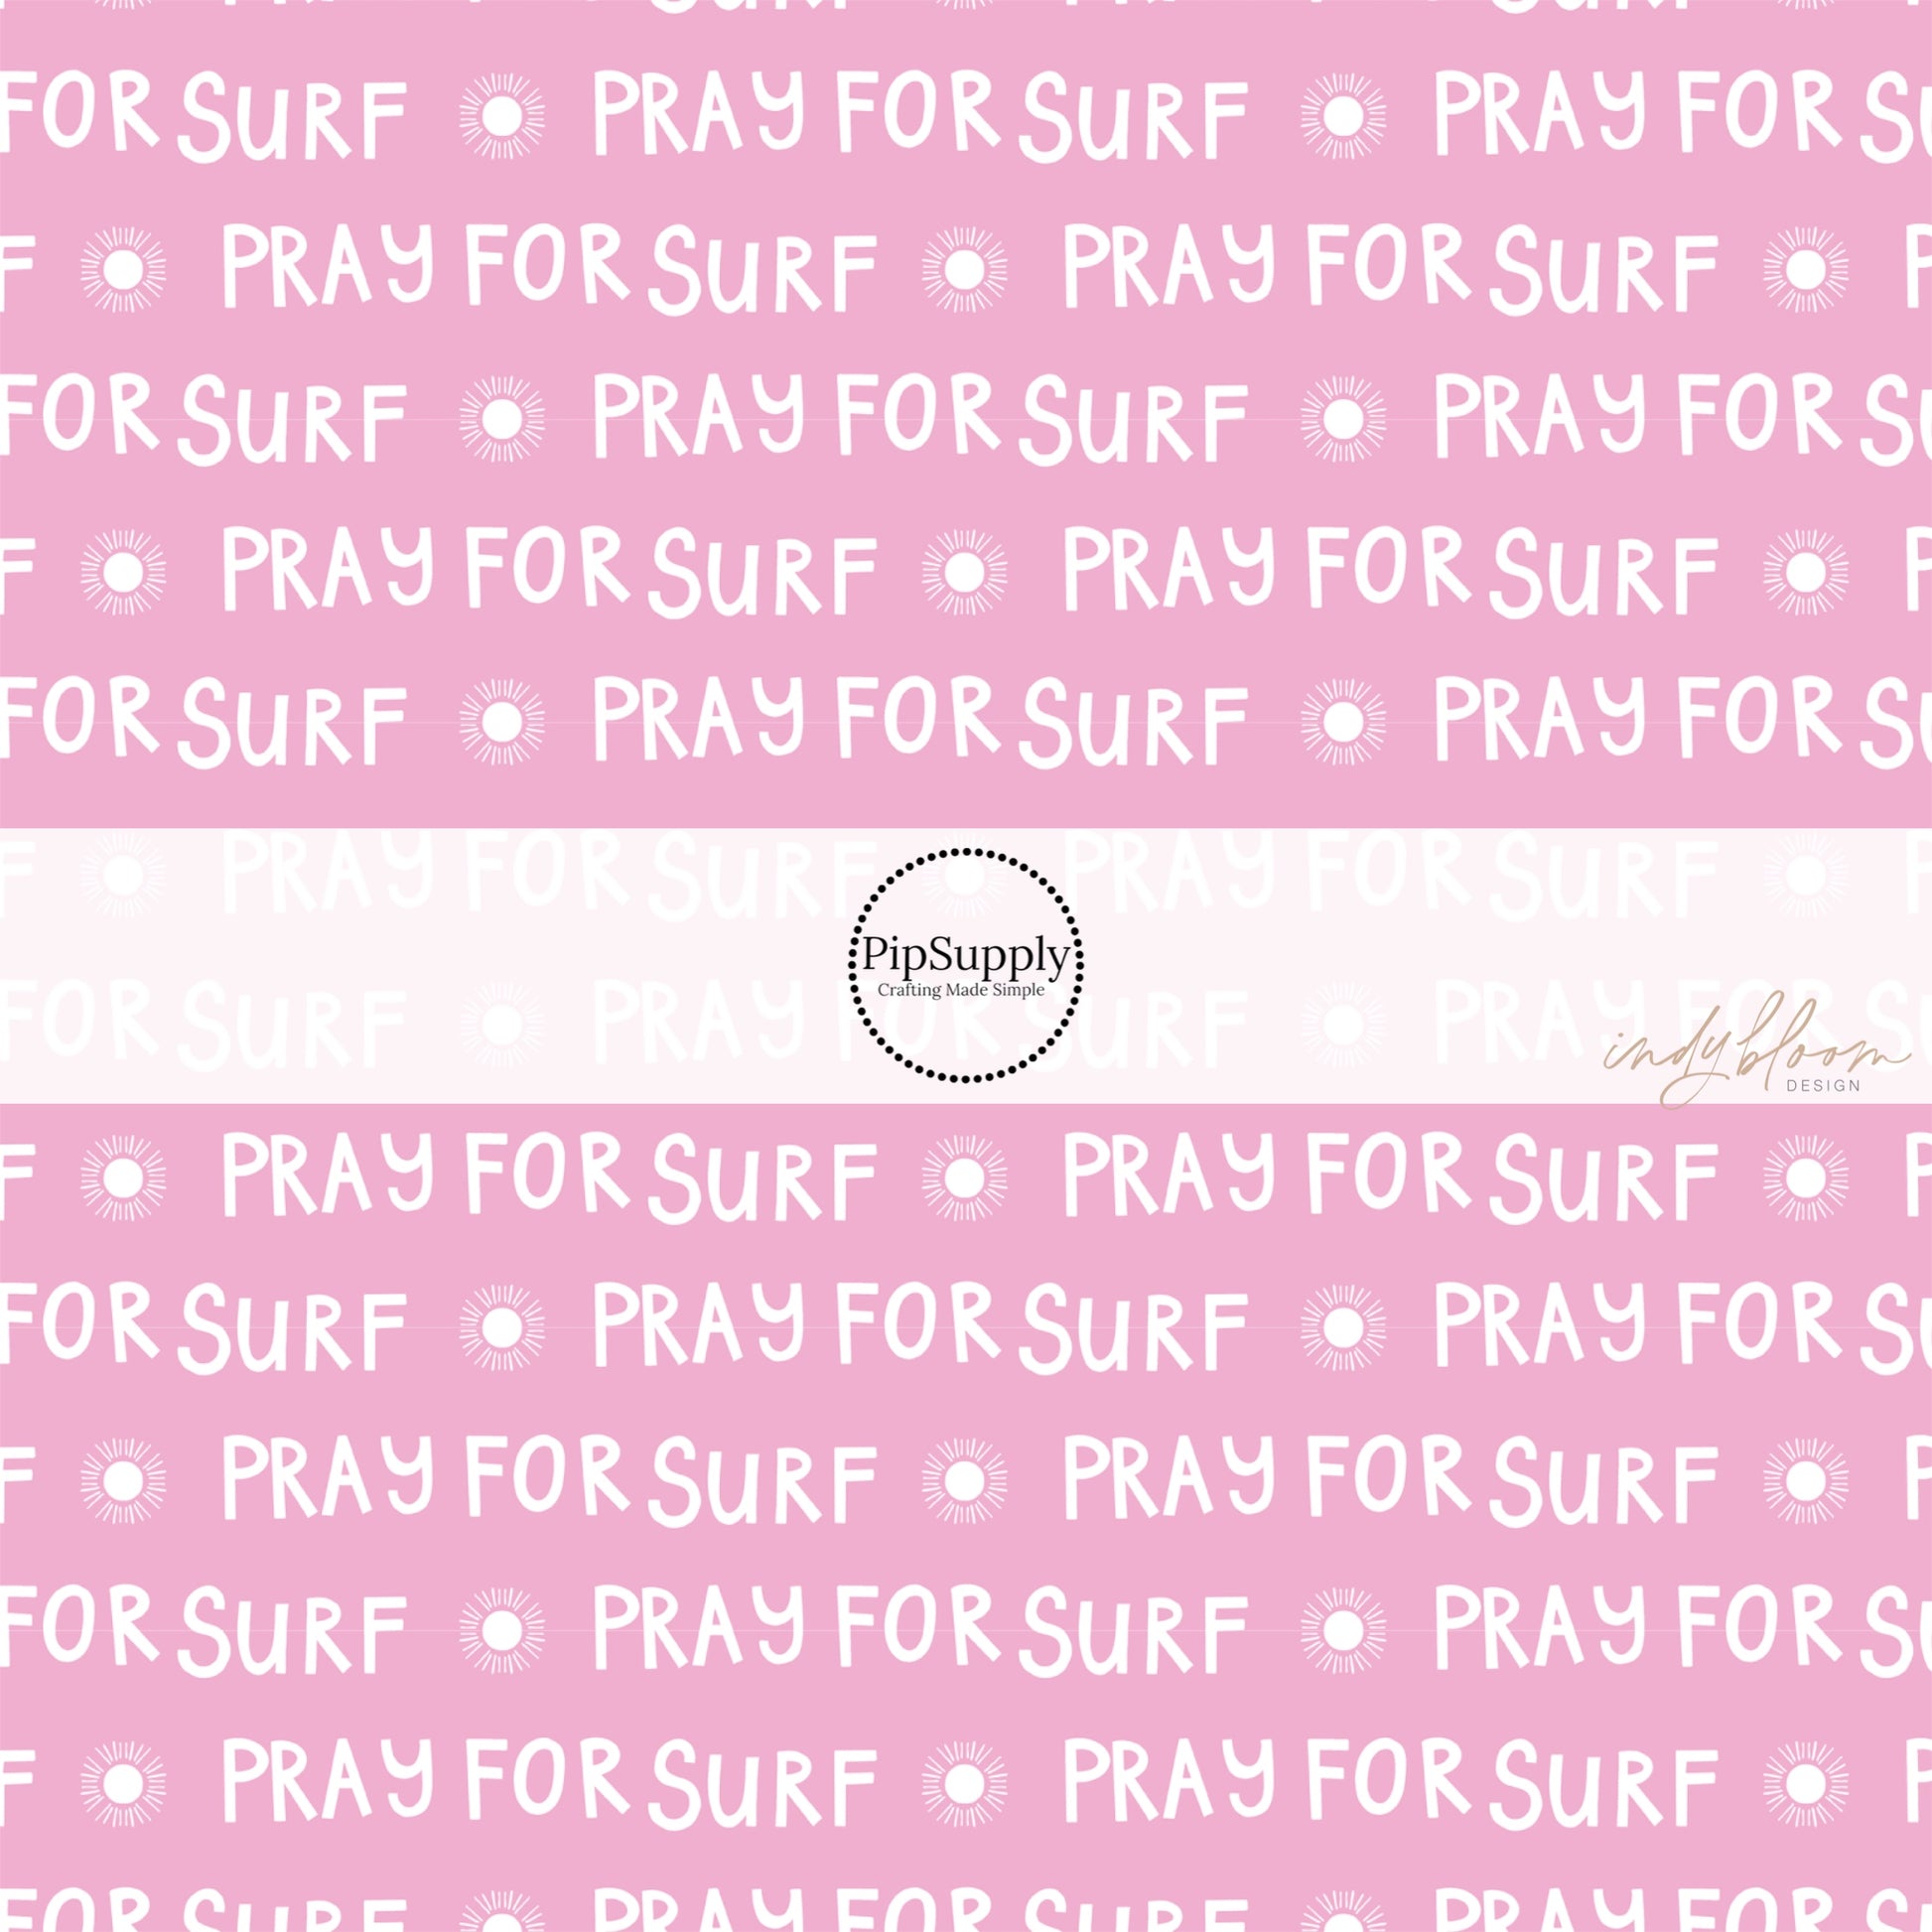 Surf sayings "pray for surf" written in white on pink bow strips